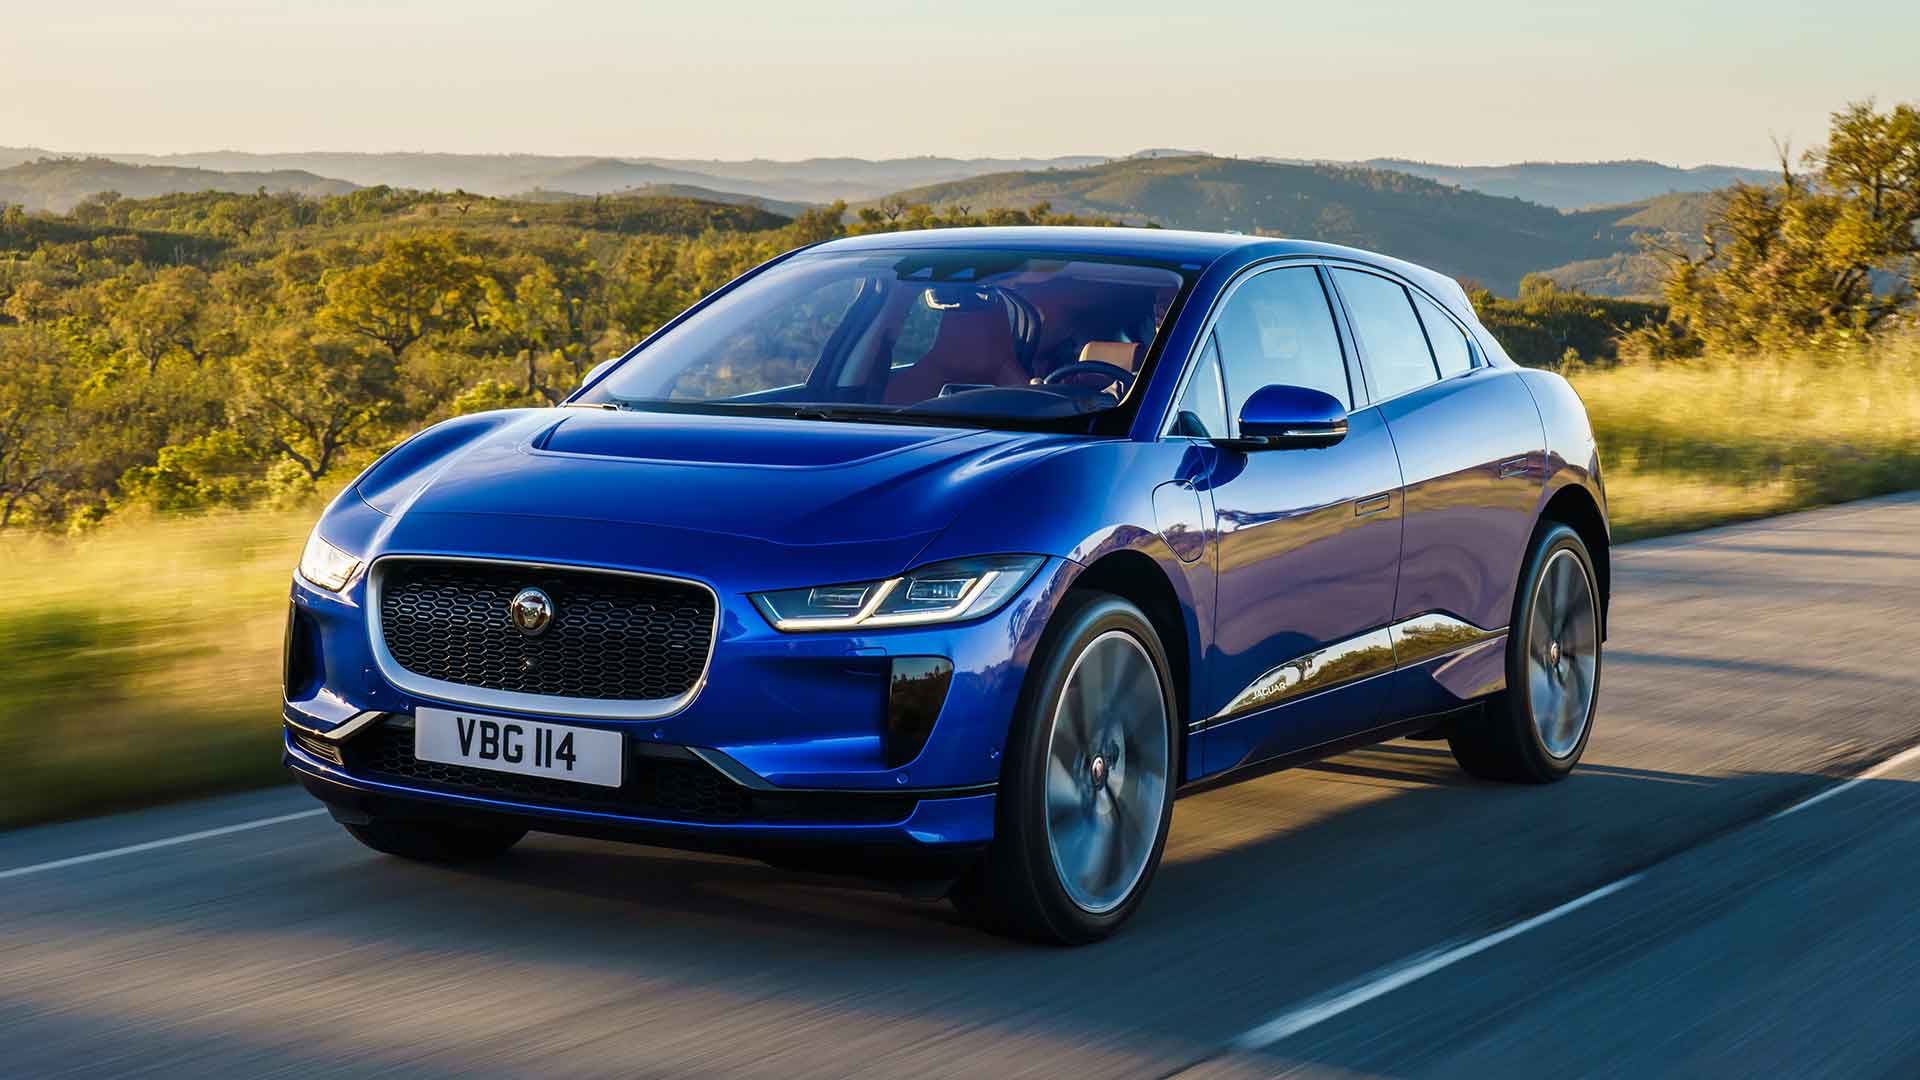 Experts pick the 10 safest new cars of 2019 Motoring Research